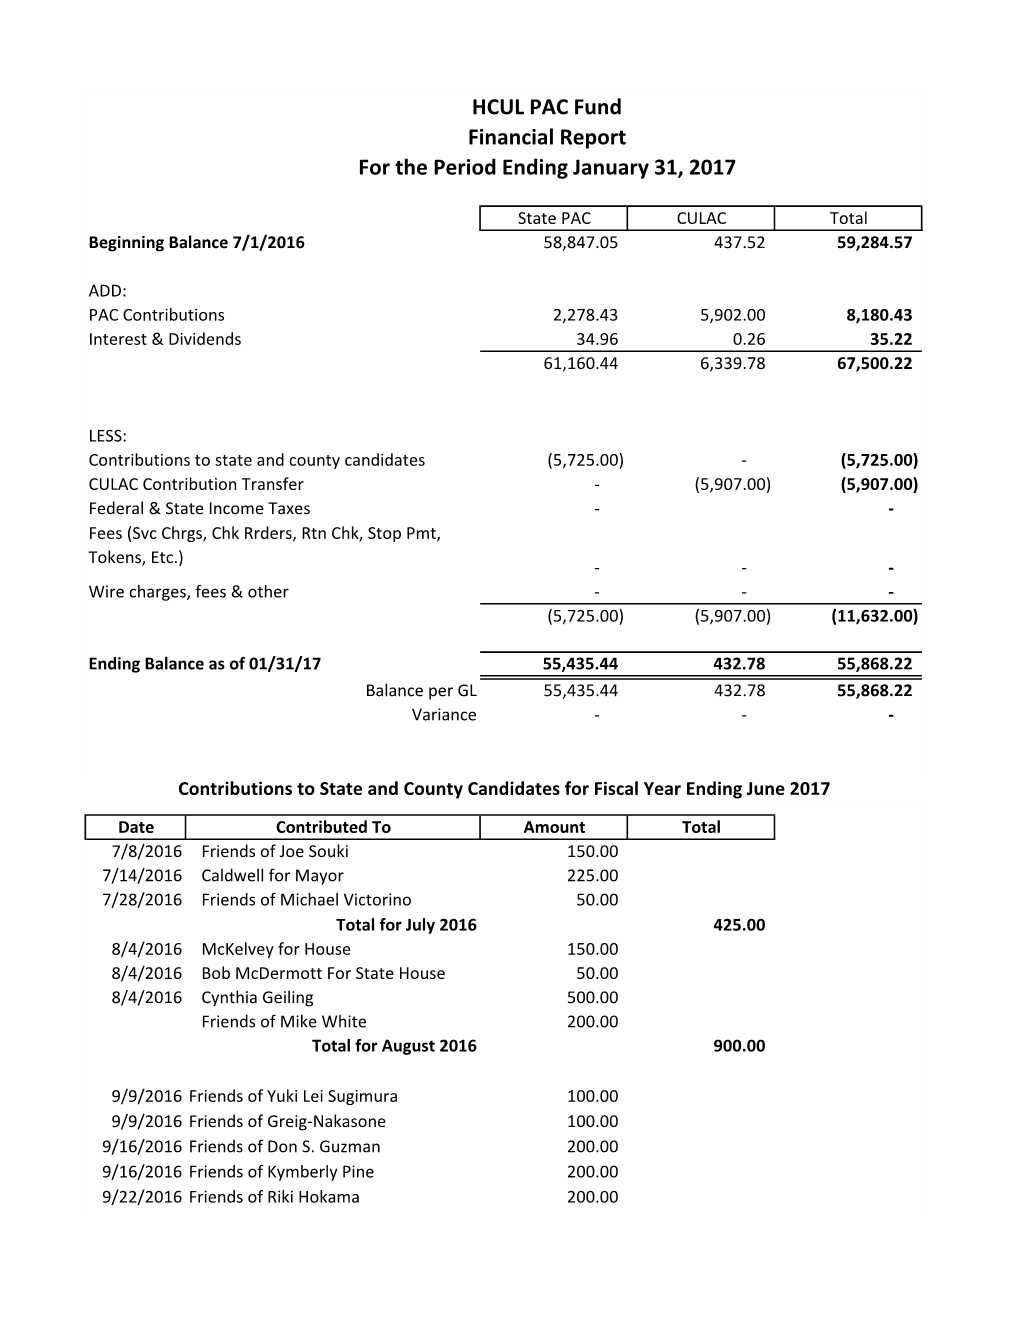 HCUL PAC Fund Financial Report for the Period Ending January 31, 2017